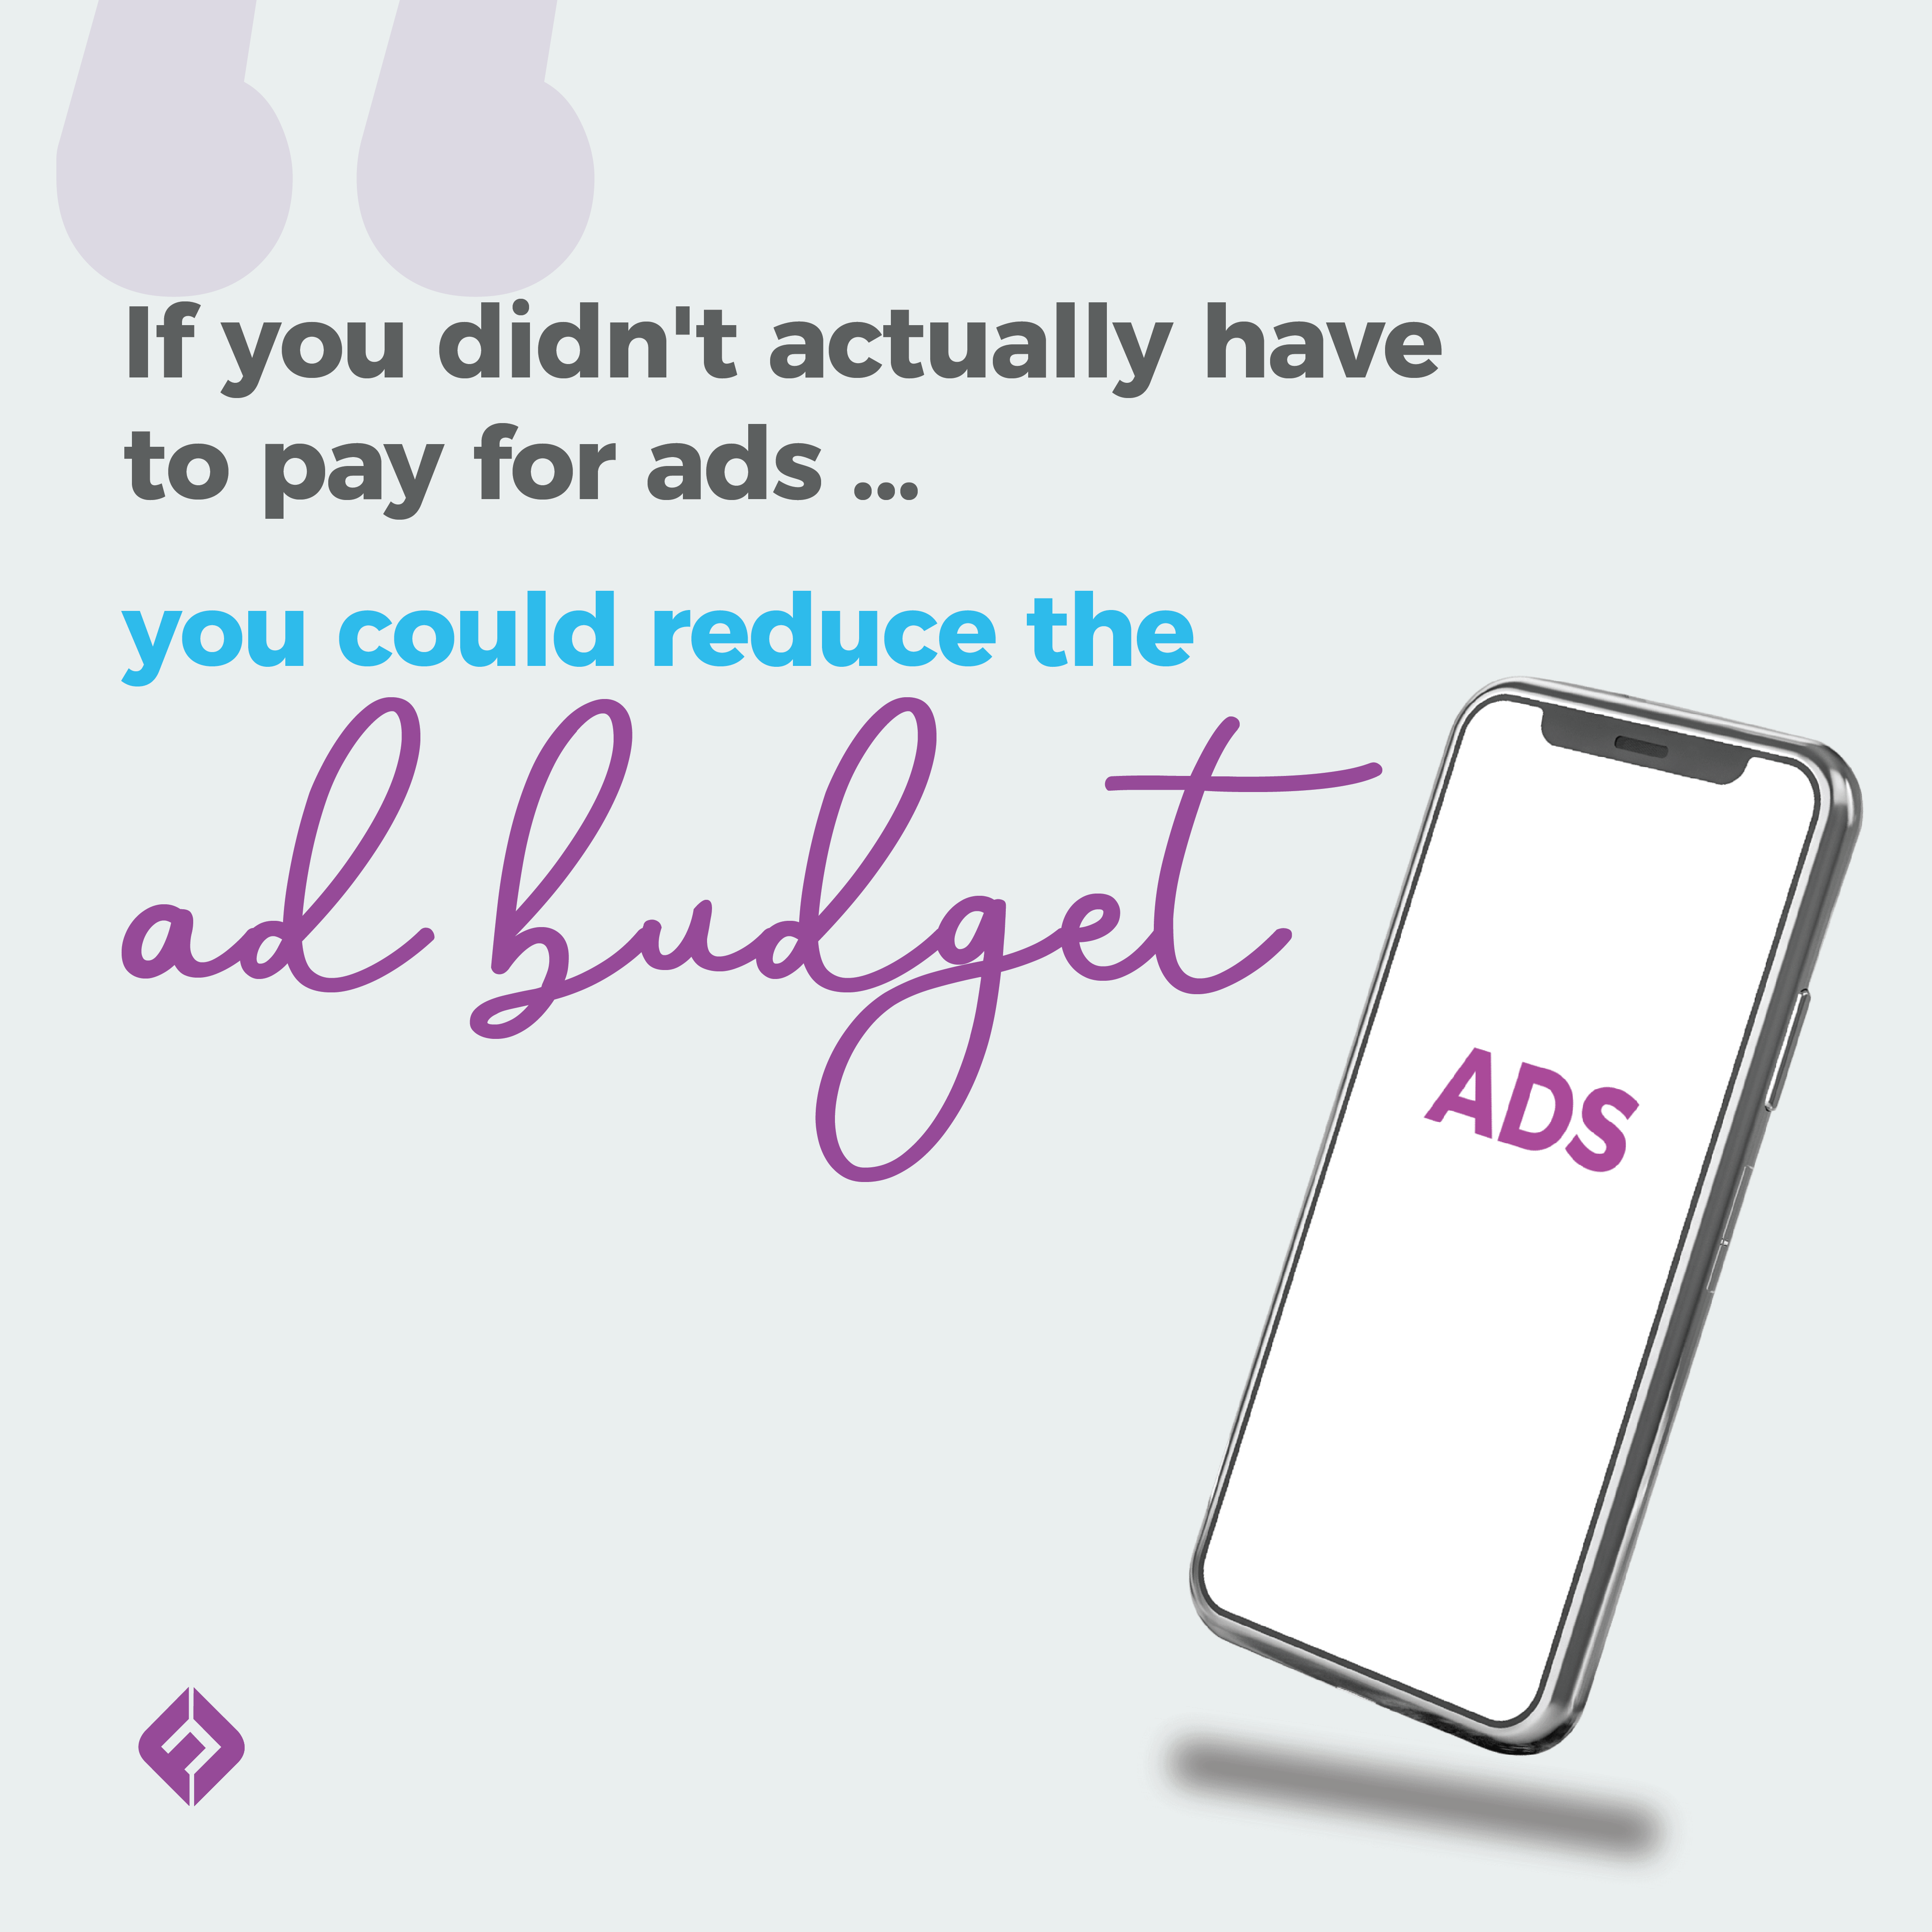 If you didn't actually have to pay for ads … you could reduce that ad budget.